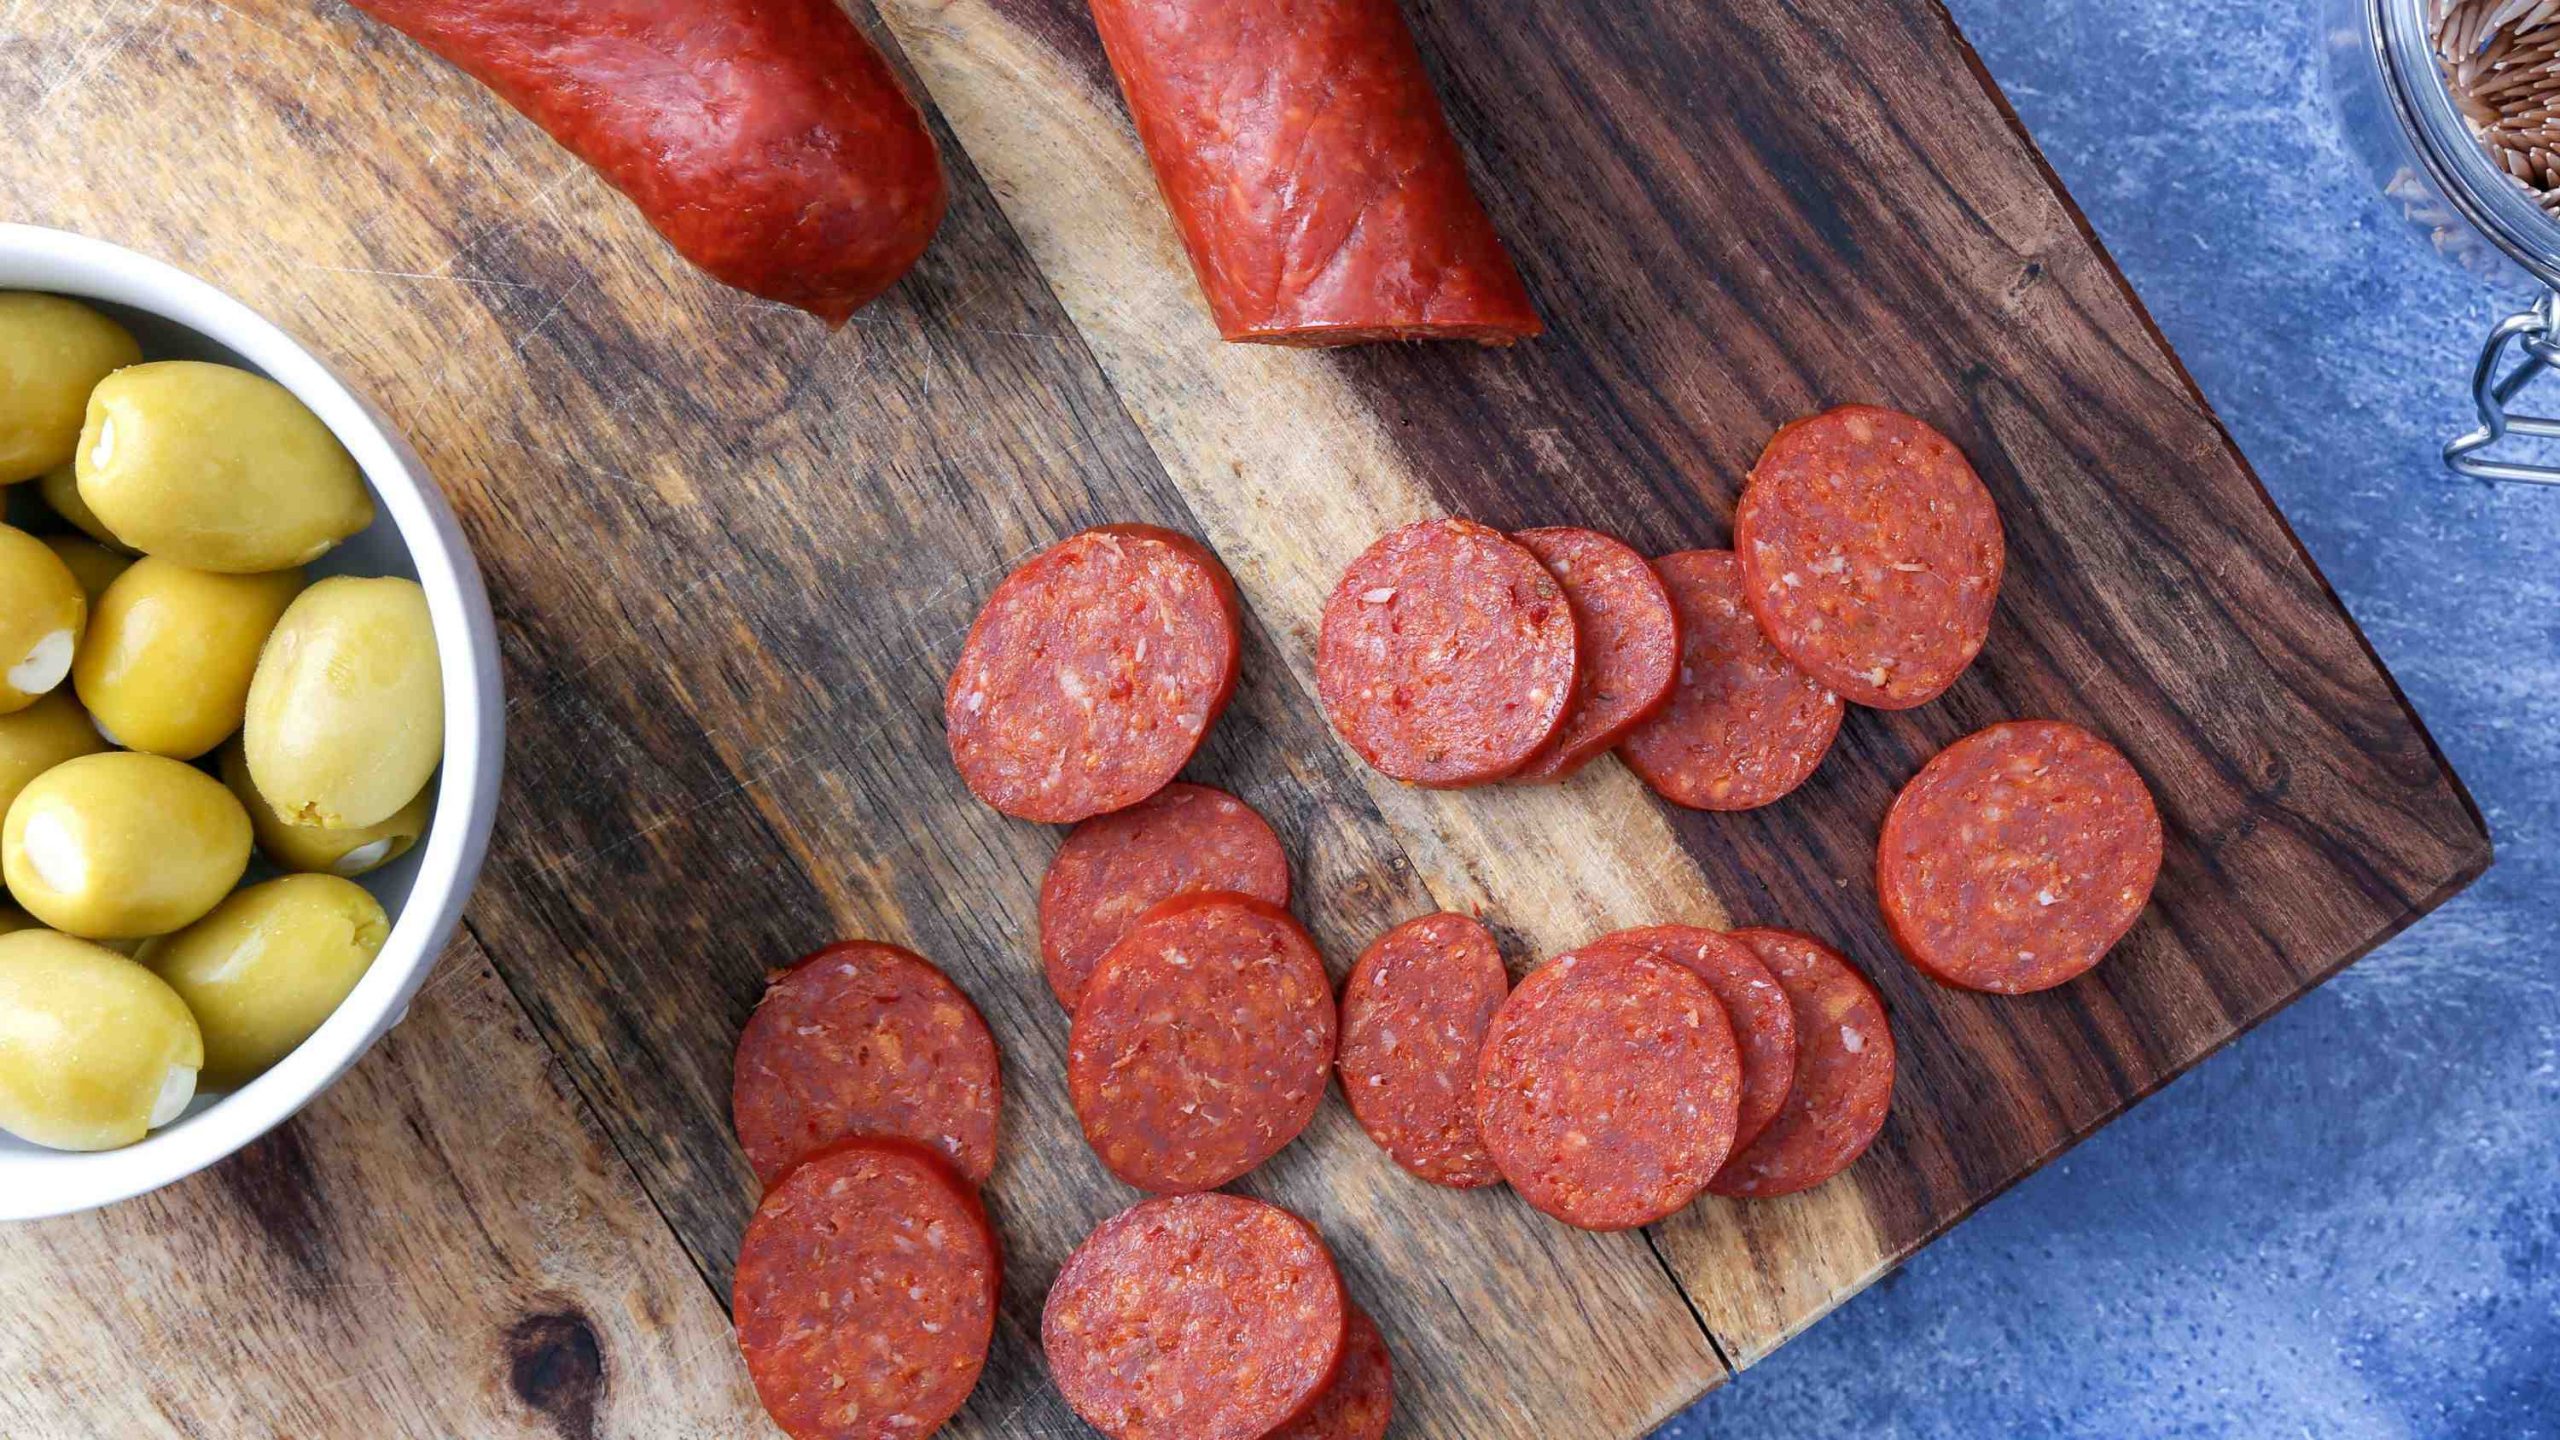 What is sausage called in Italian?